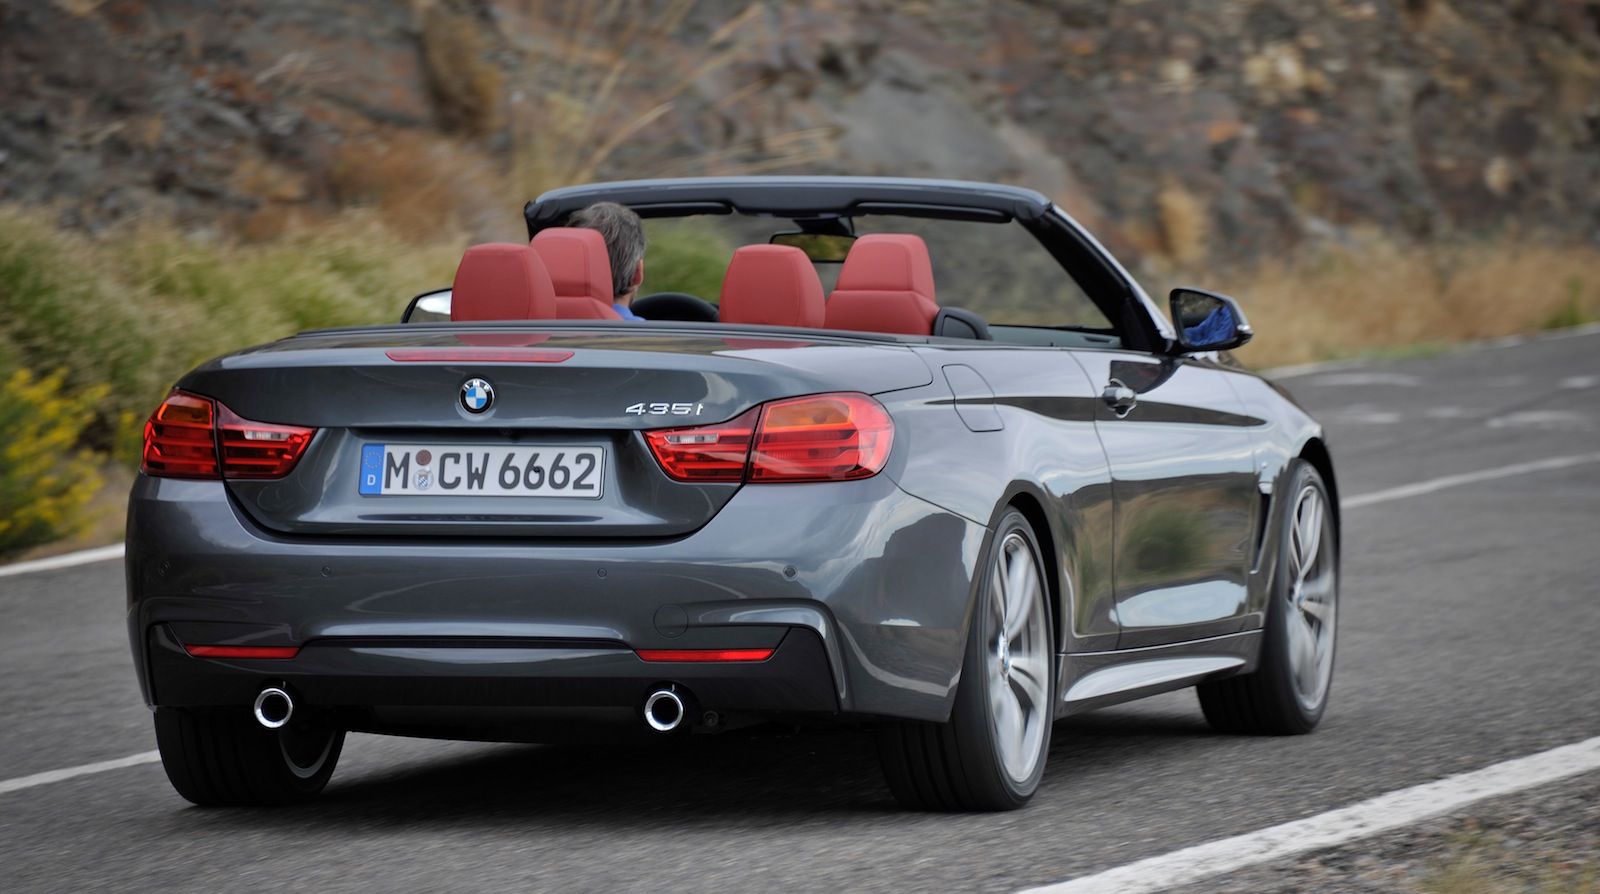 BMW 4 Series Car Review: Style, Power and Elegance